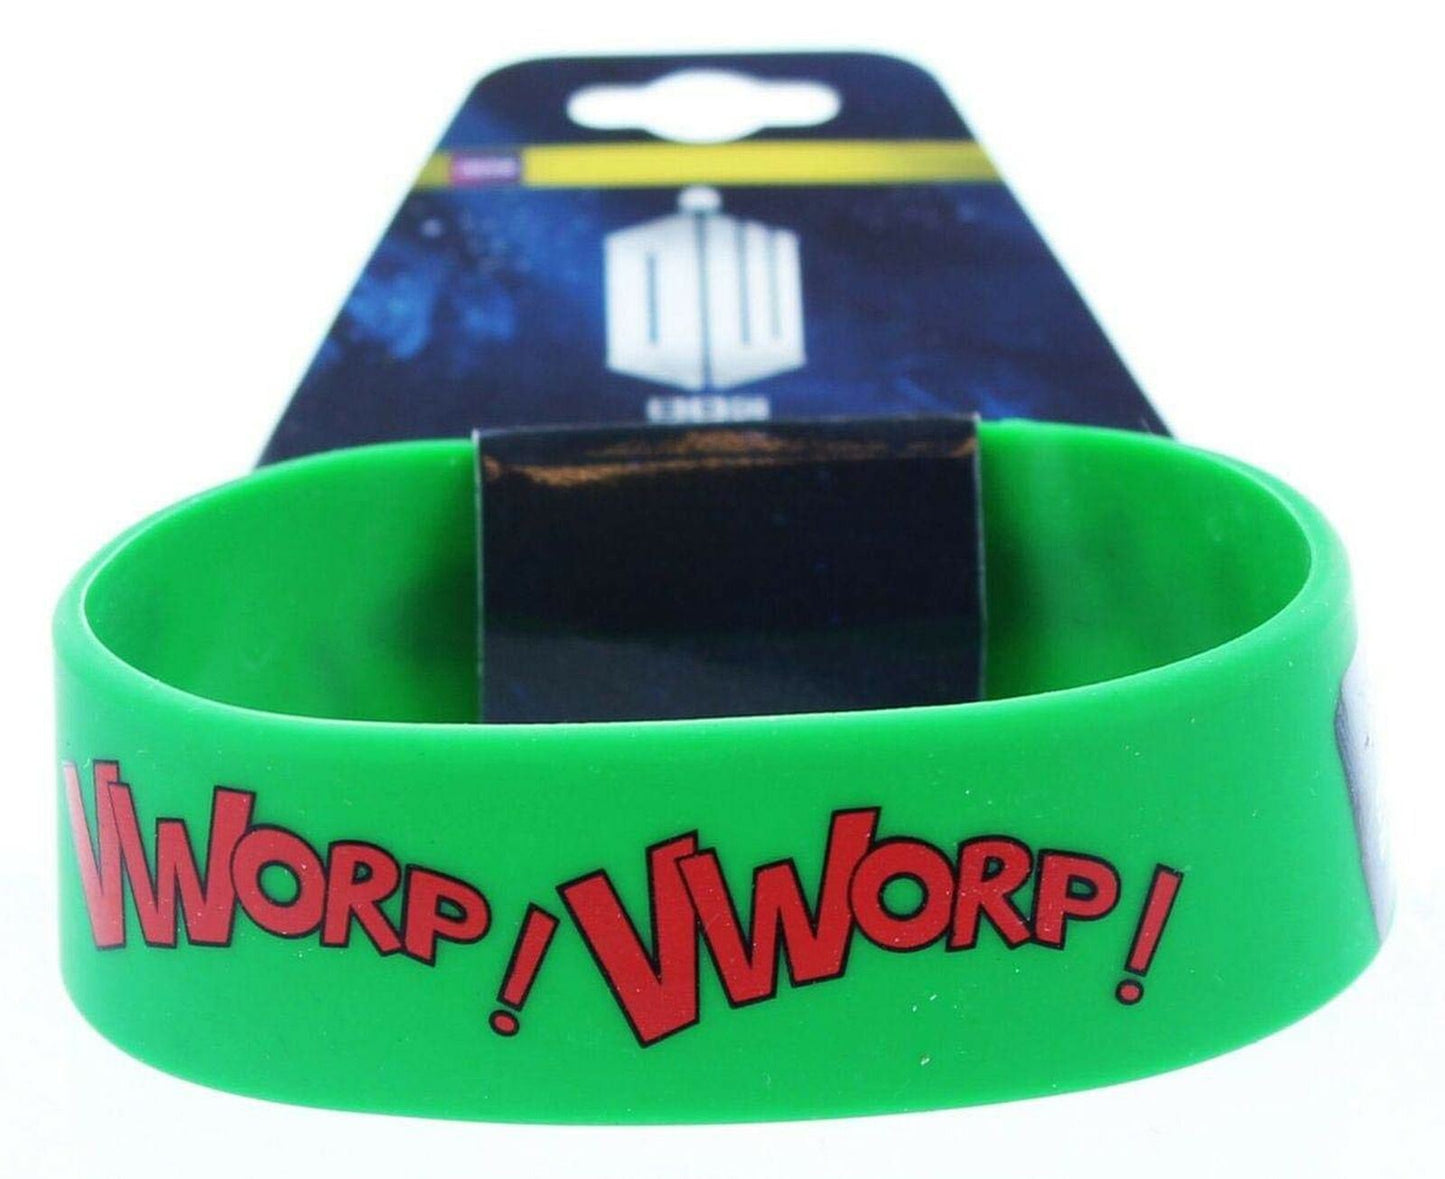 Underground Toys DOCTOR WHO TARDIS Vworp! Green Rubber Wristband